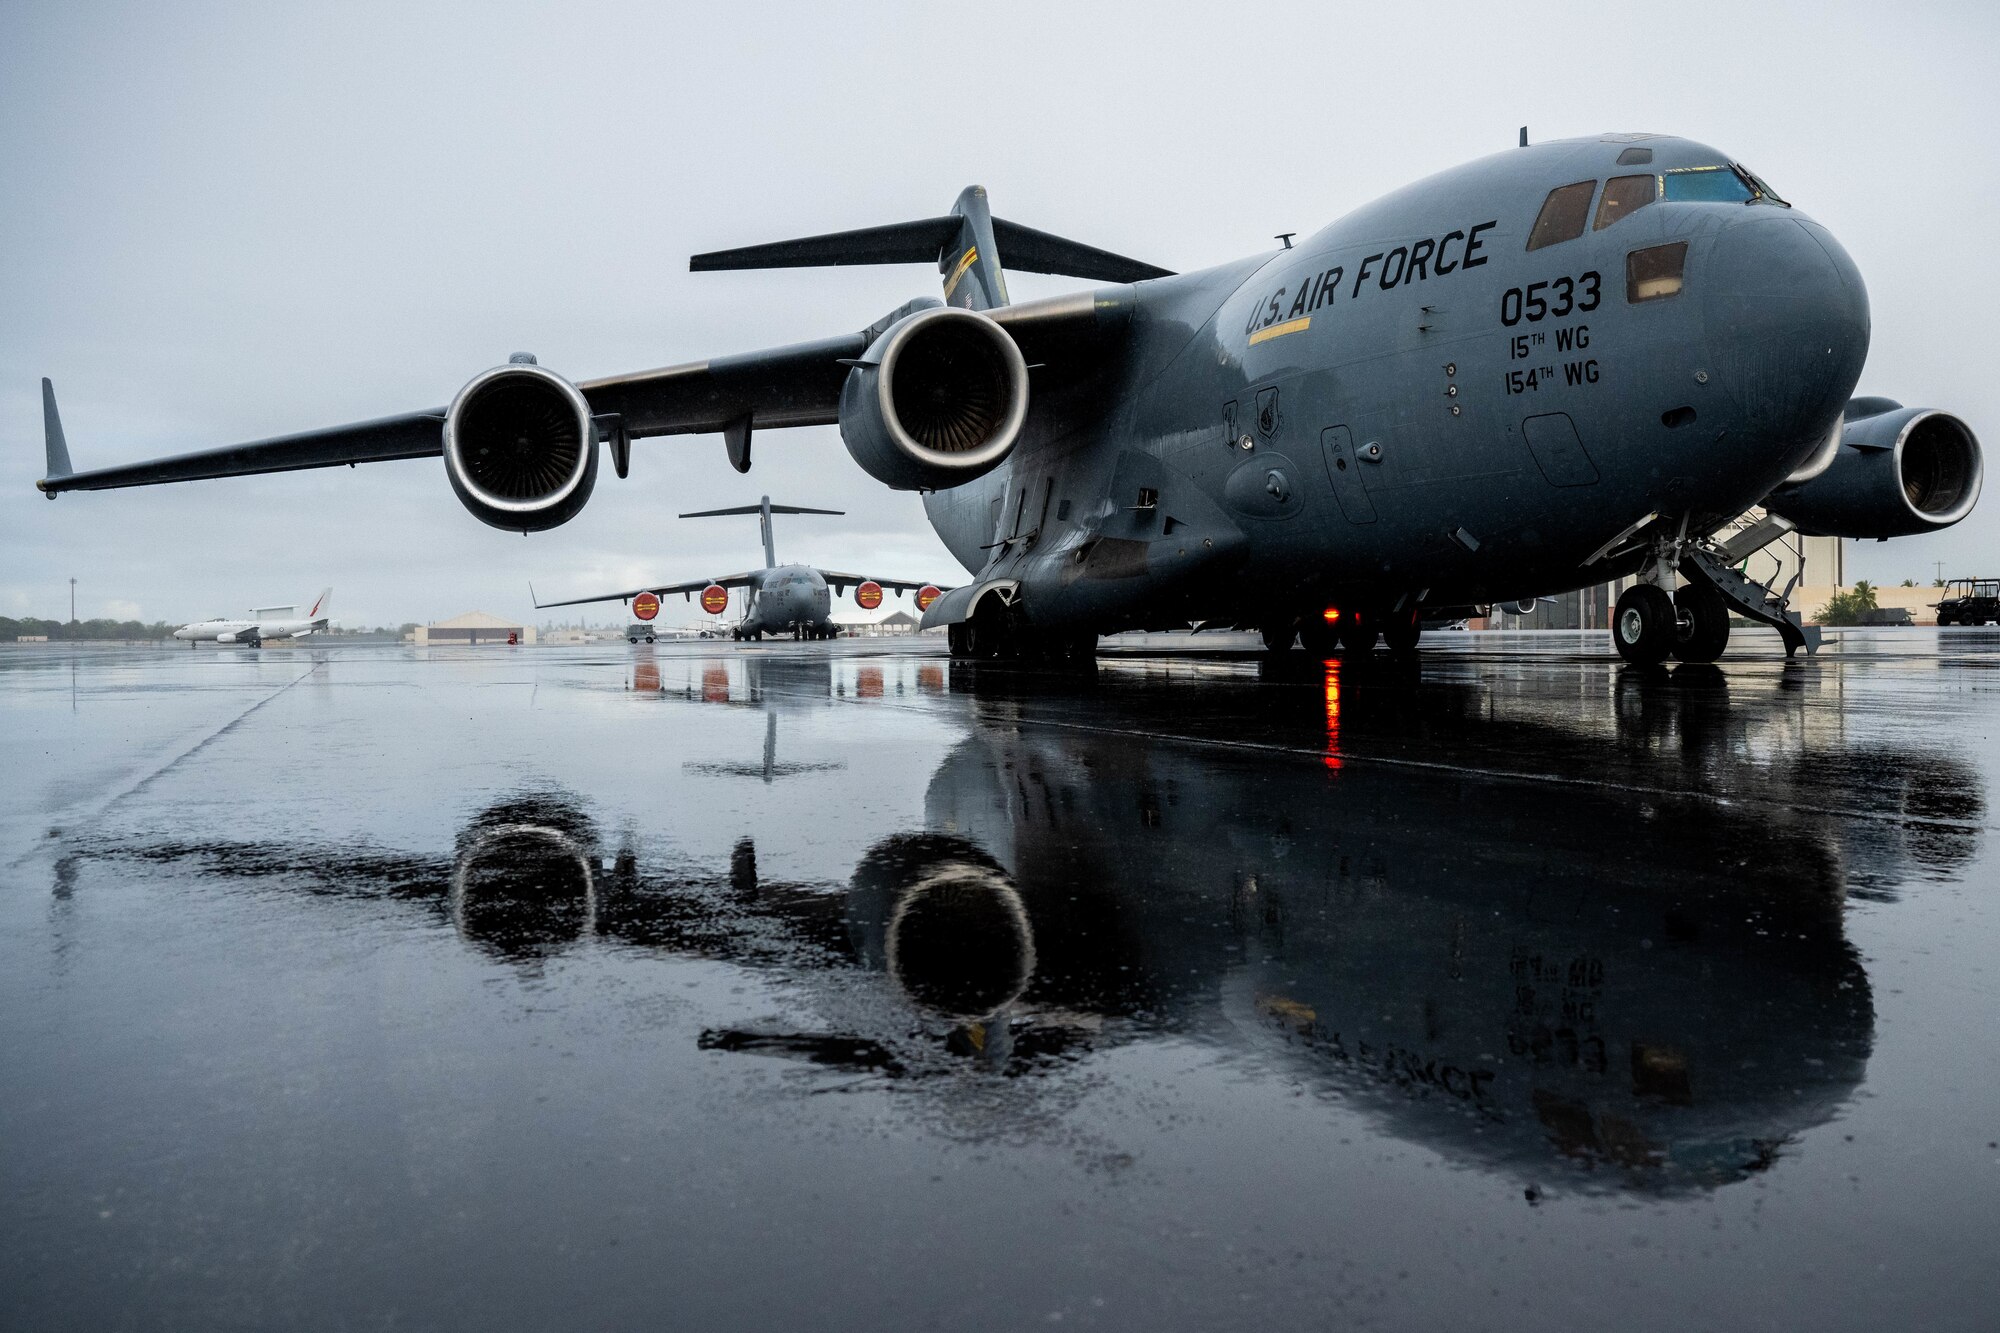 A C-17 Globemaster III awaits a mission in support of a training exercise at Joint Base Pearl Harbor-Hickam, Hawaii, Aug. 24, 2022. The C-17 is capable of strategically carrying troops and cargo to any operating base in the world. (U.S. Air Force photo by Senior Airman Makensie Cooper)